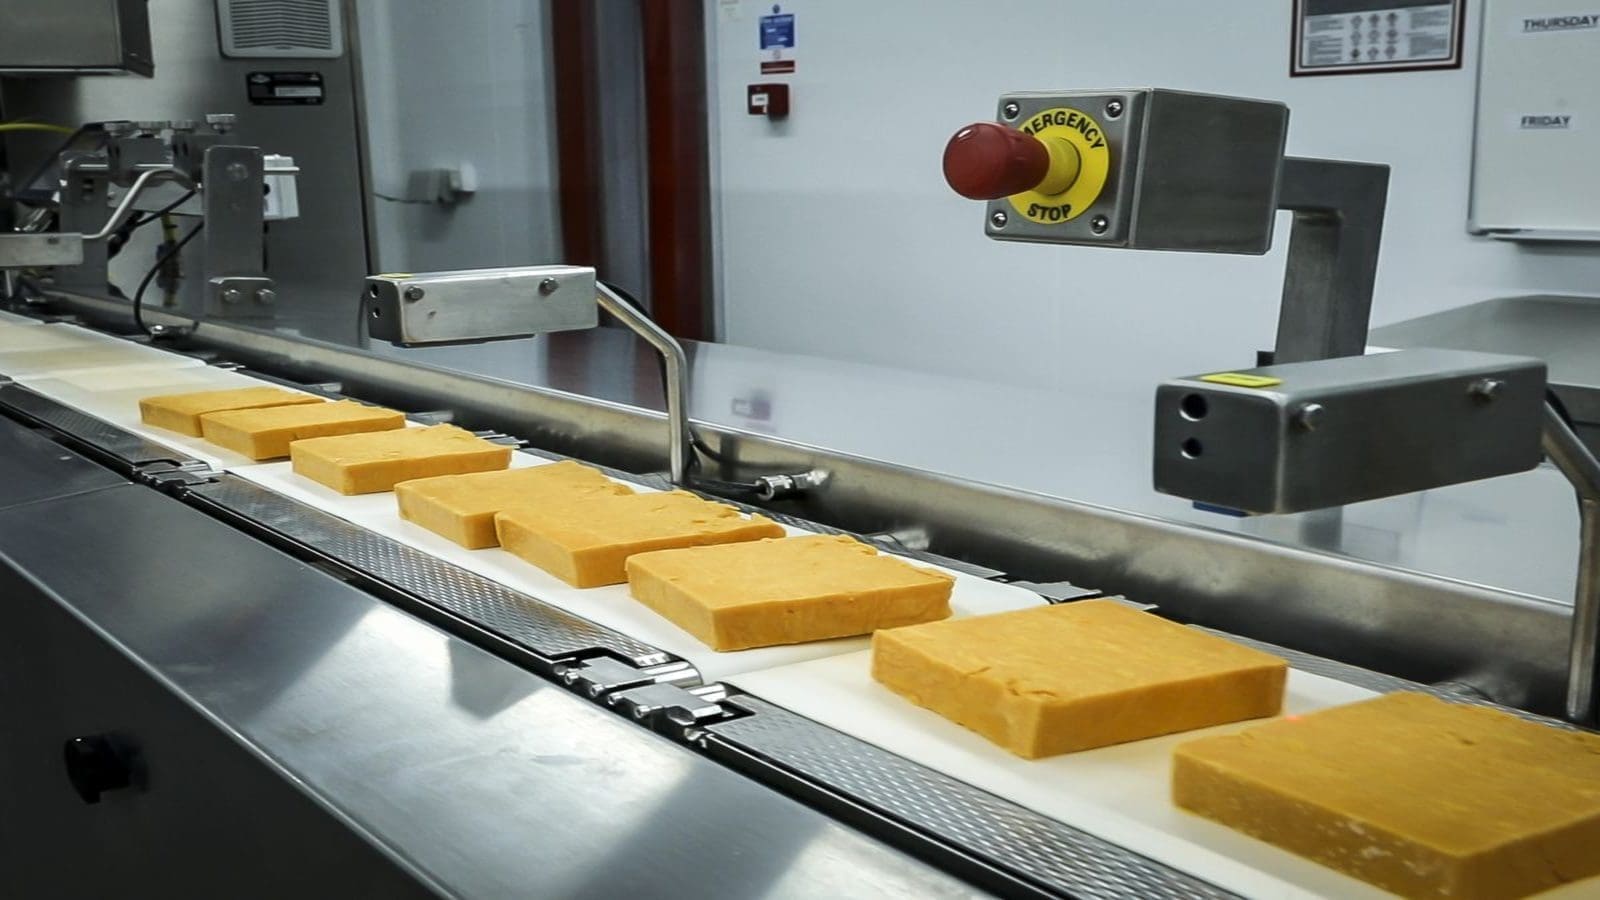 Belton Farm invests US$1.73m in construction of cheese packing facility